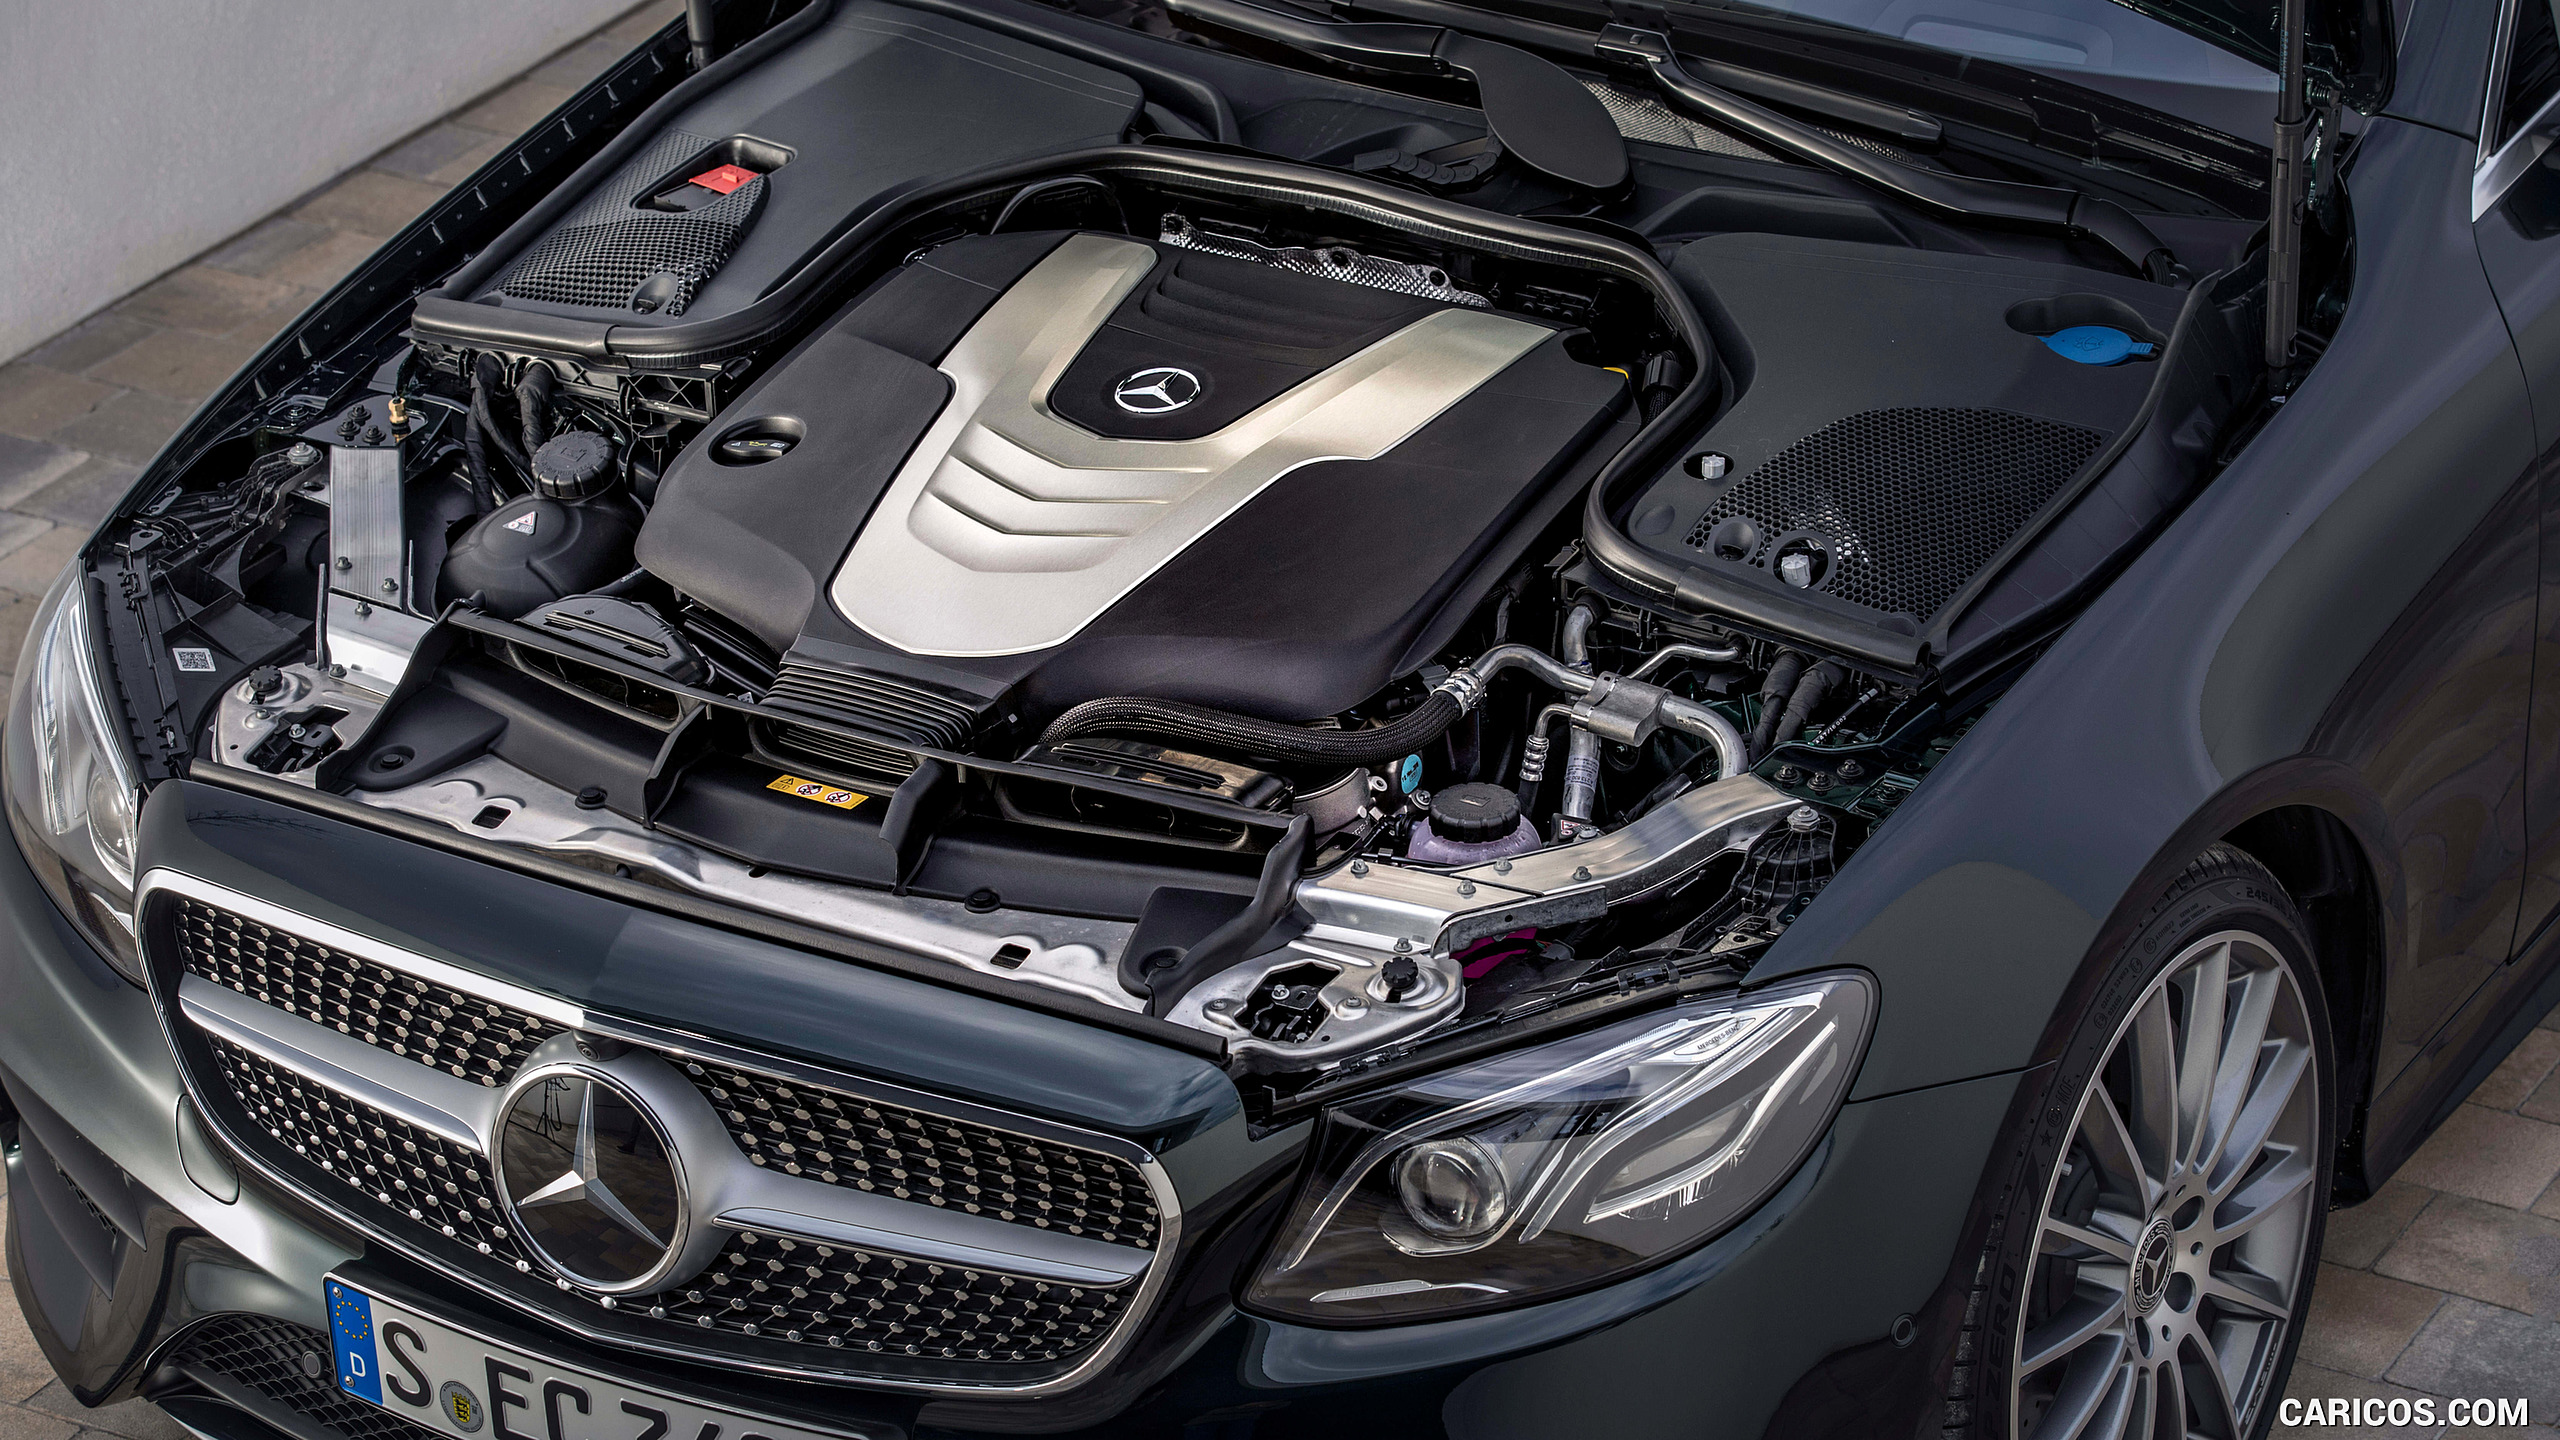 2018 Mercedes-Benz E400 Coupe 4MATIC - Engine, #212 of 365